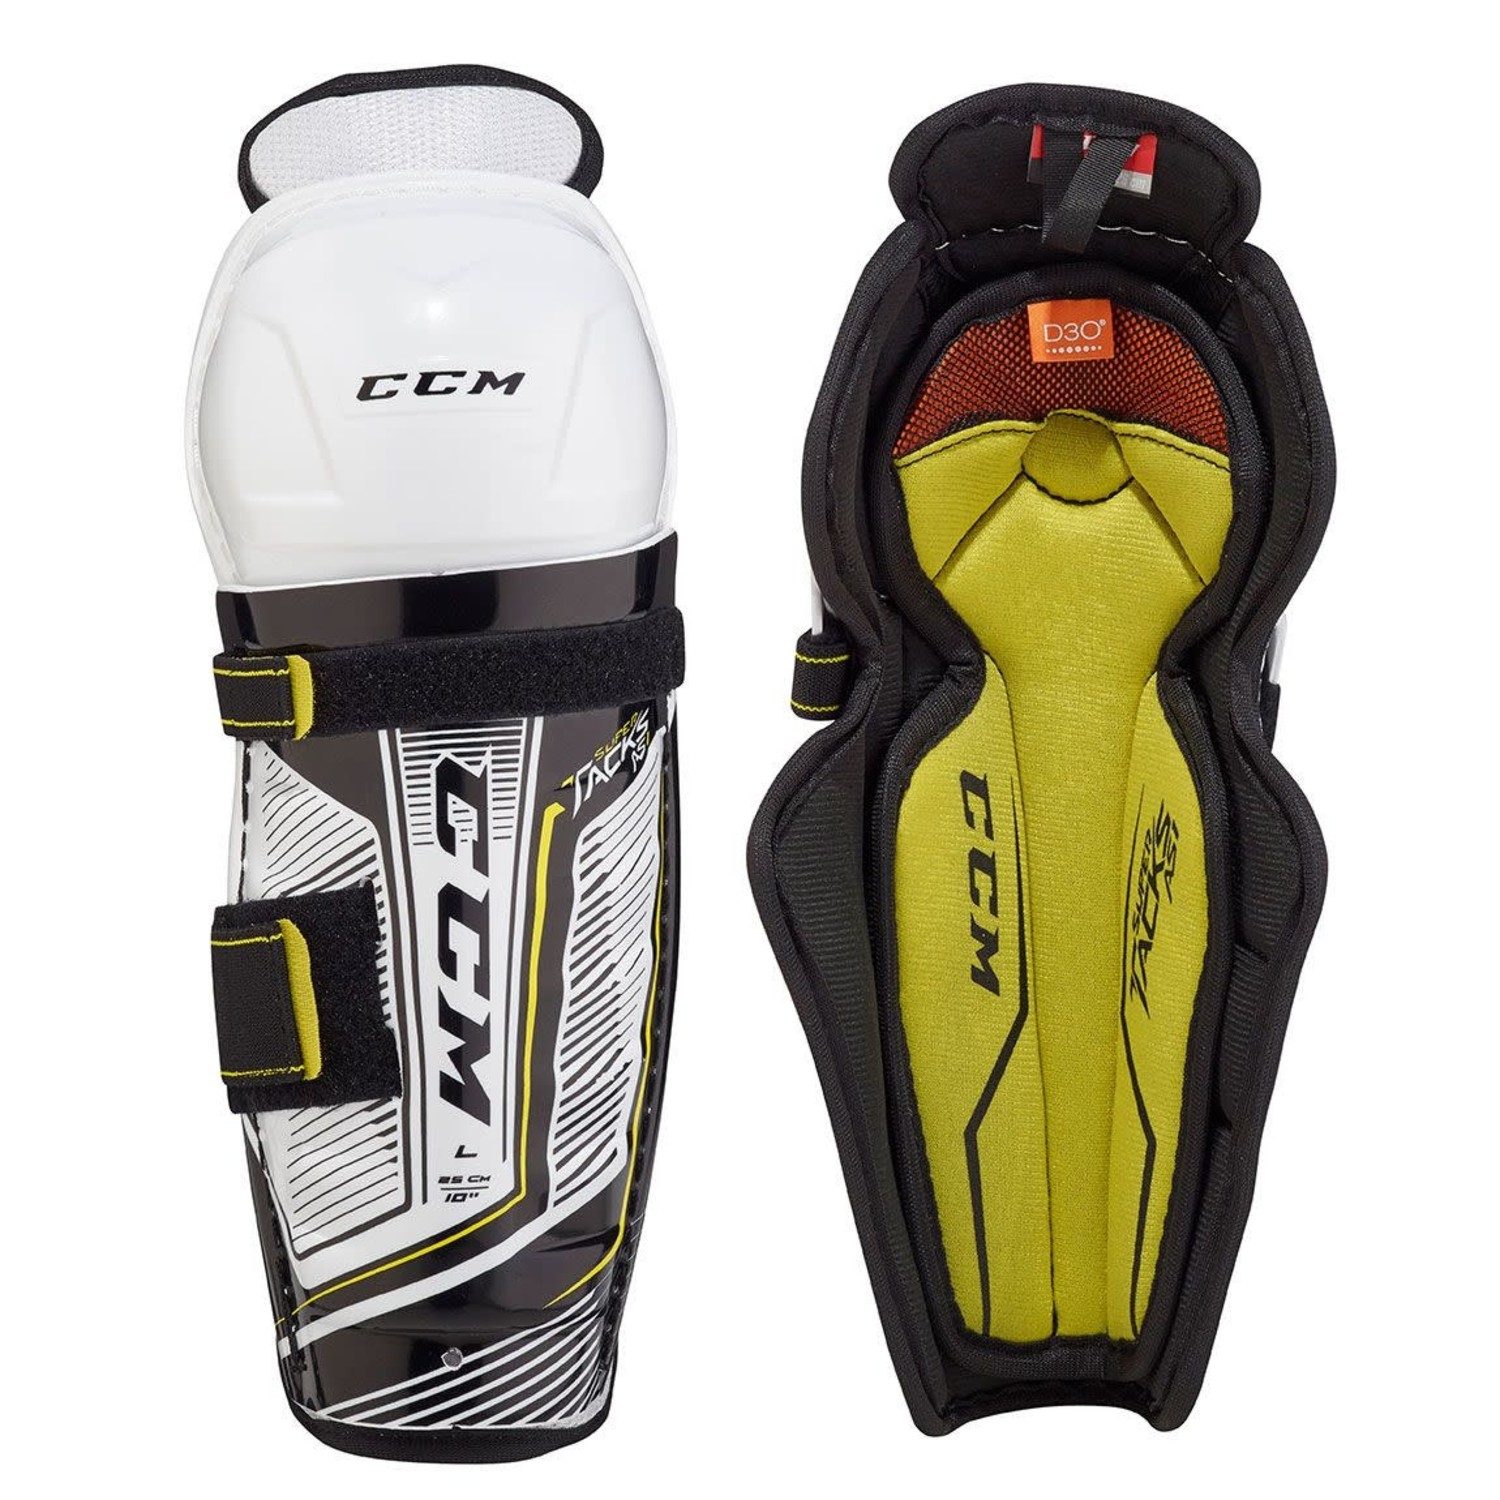 CCM AS1 SHIN GUARD YOUTH 2019 - Professional Skate Service